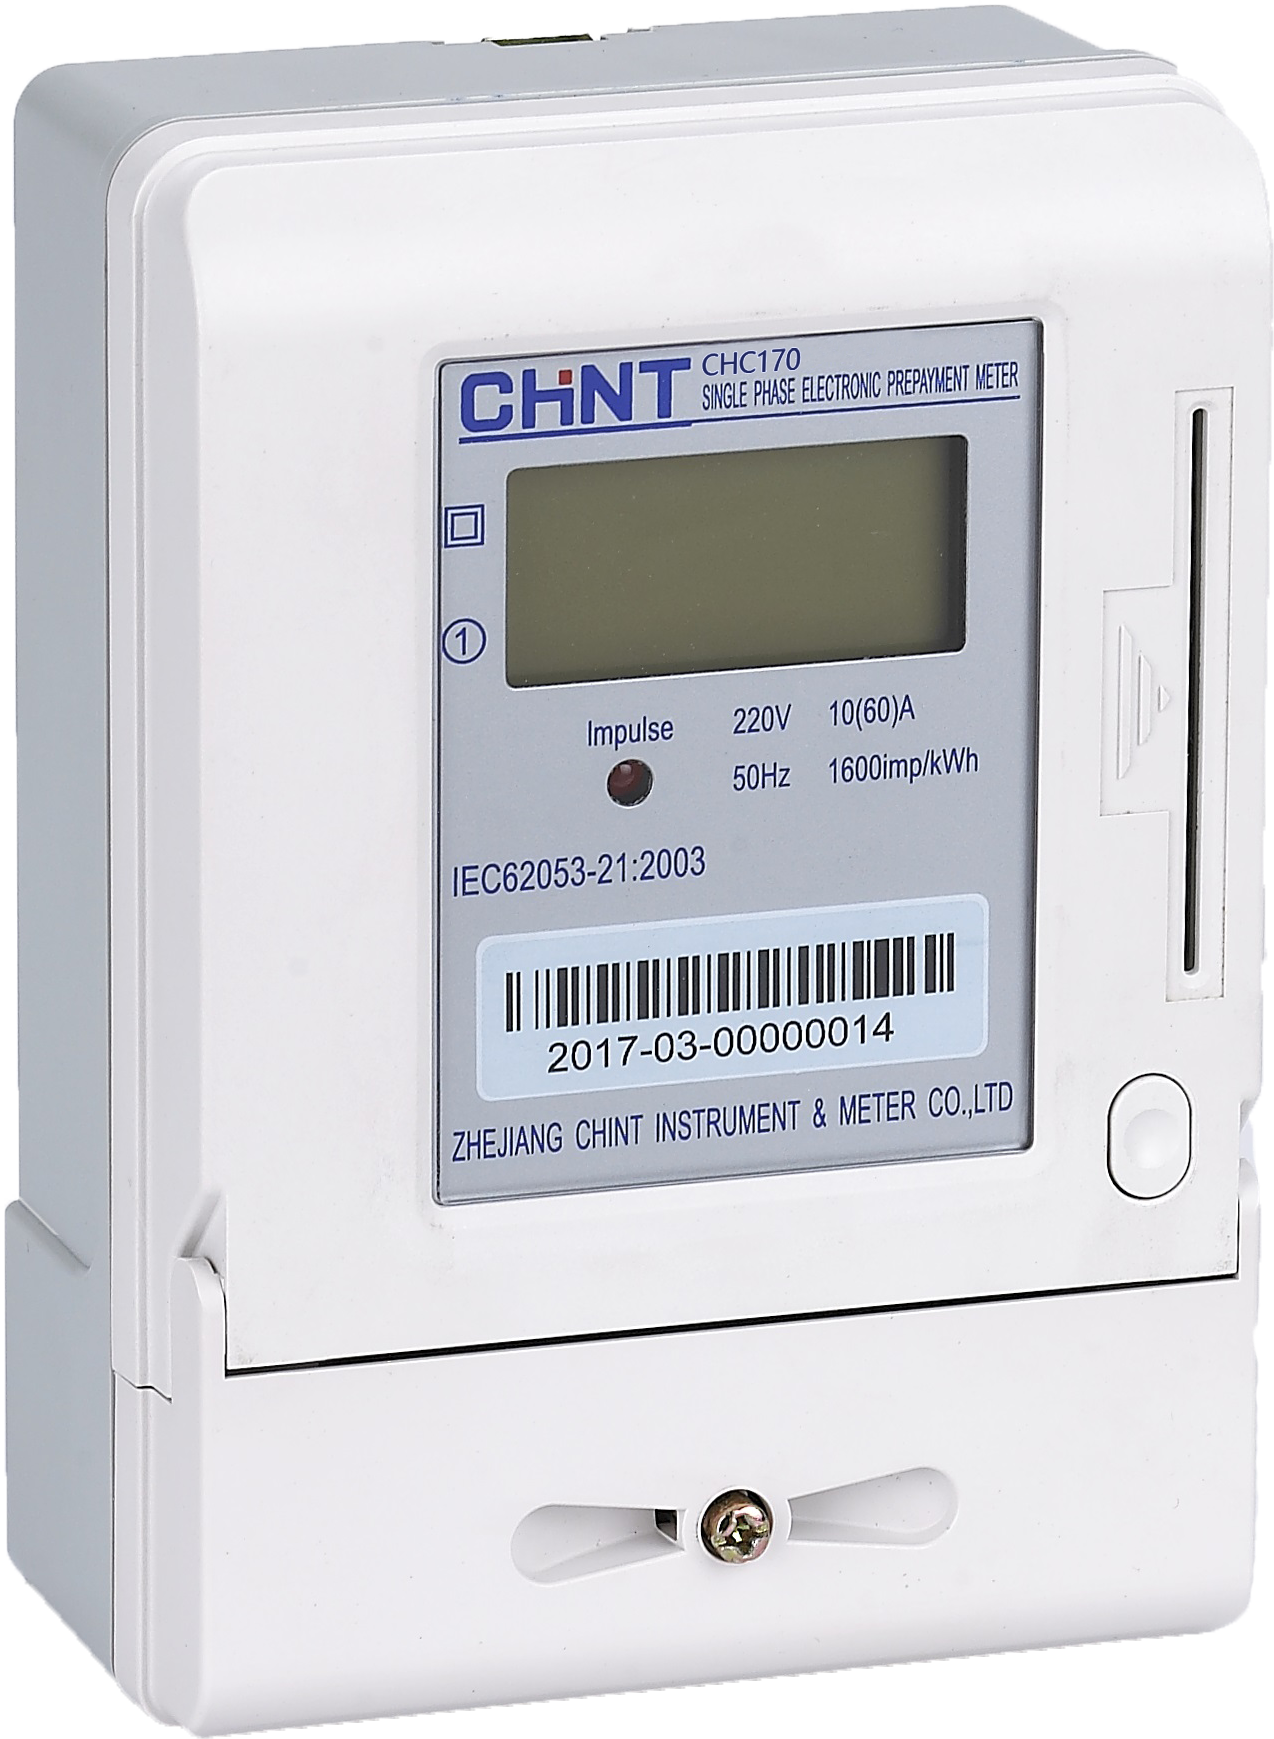 CHC170 Single Phase Smart Card Meter